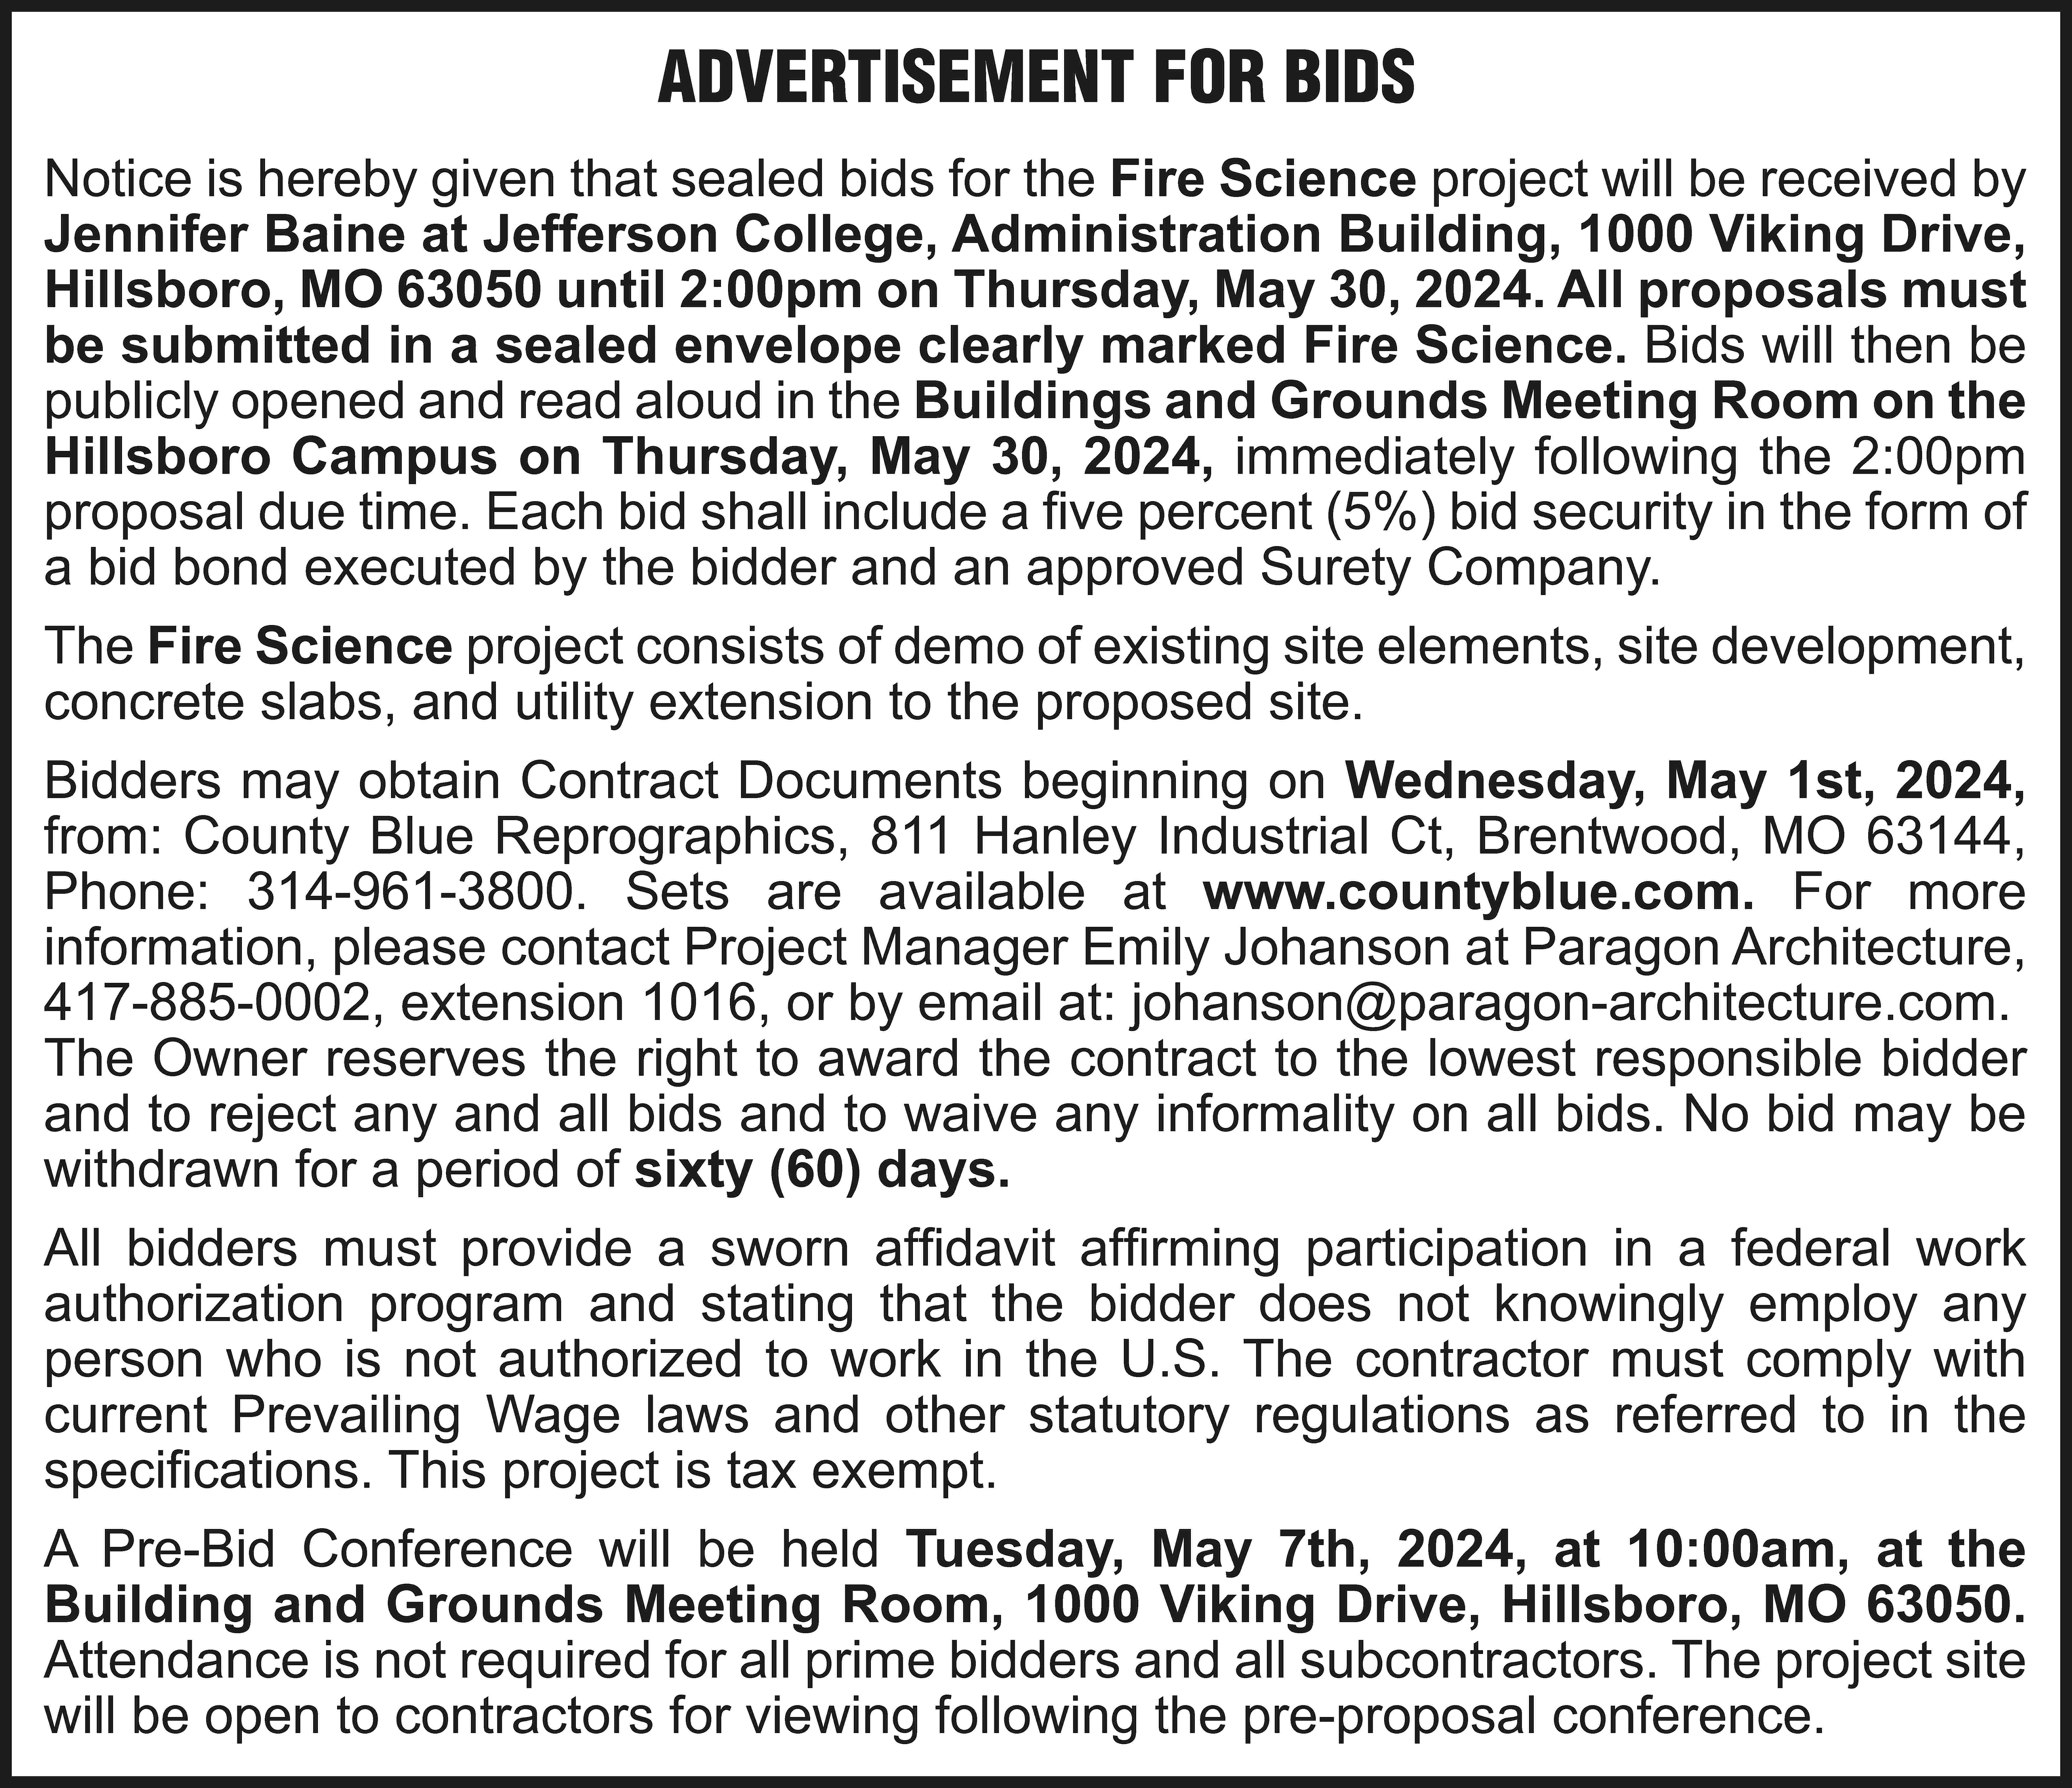 ADVERTISEMENT FOR BIDS Notice is  ADVERTISEMENT FOR BIDS Notice is hereby given that sealed bids for the Fire Science project will be received by Jennifer Baine at Jefferson College, Administration Building, 1000 Viking Drive, Hillsboro, MO 63050 until 2:00pm on Thursday, May 30, 2024. All proposals must be submitted in a sealed envelope clearly marked Fire Science. Bids will then be publicly opened and read aloud in the Buildings and Grounds Meeting Room on the Hillsboro Campus on Thursday, May 30, 2024, immediately following the 2:00pm proposal due time. Each bid shall include a five percent (5%) bid security in the form of a bid bond executed by the bidder and an approved Surety Company. The Fire Science project consists of demo of existing site elements, site development, concrete slabs, and utility extension to the proposed site. Bidders may obtain Contract Documents beginning on Wednesday, May 1st, 2024, from: County Blue Reprographics, 811 Hanley Industrial Ct, Brentwood, MO 63144, Phone: 314-961-3800. Sets are available at www.countyblue.com. For more information, please contact Project Manager Emily Johanson at Paragon Architecture, 417-885-0002, extension 1016, or by email at: johanson@paragon-architecture.com. The Owner reserves the right to award the contract to the lowest responsible bidder and to reject any and all bids and to waive any informality on all bids. No bid may be withdrawn for a period of sixty (60) days. All bidders must provide a sworn affidavit affirming participation in a federal work authorization program and stating that the bidder does not knowingly employ any person who is not authorized to work in the U.S. The contractor must comply with current Prevailing Wage laws and other statutory regulations as referred to in the specifications. This project is tax exempt. A Pre-Bid Conference will be held Tuesday, May 7th, 2024, at 10:00am, at the Building and Grounds Meeting Room, 1000 Viking Drive, Hillsboro, MO 63050. Attendance is not required for all prime bidders and all subcontractors. The project site will be open to contractors for viewing following the pre-proposal conference.